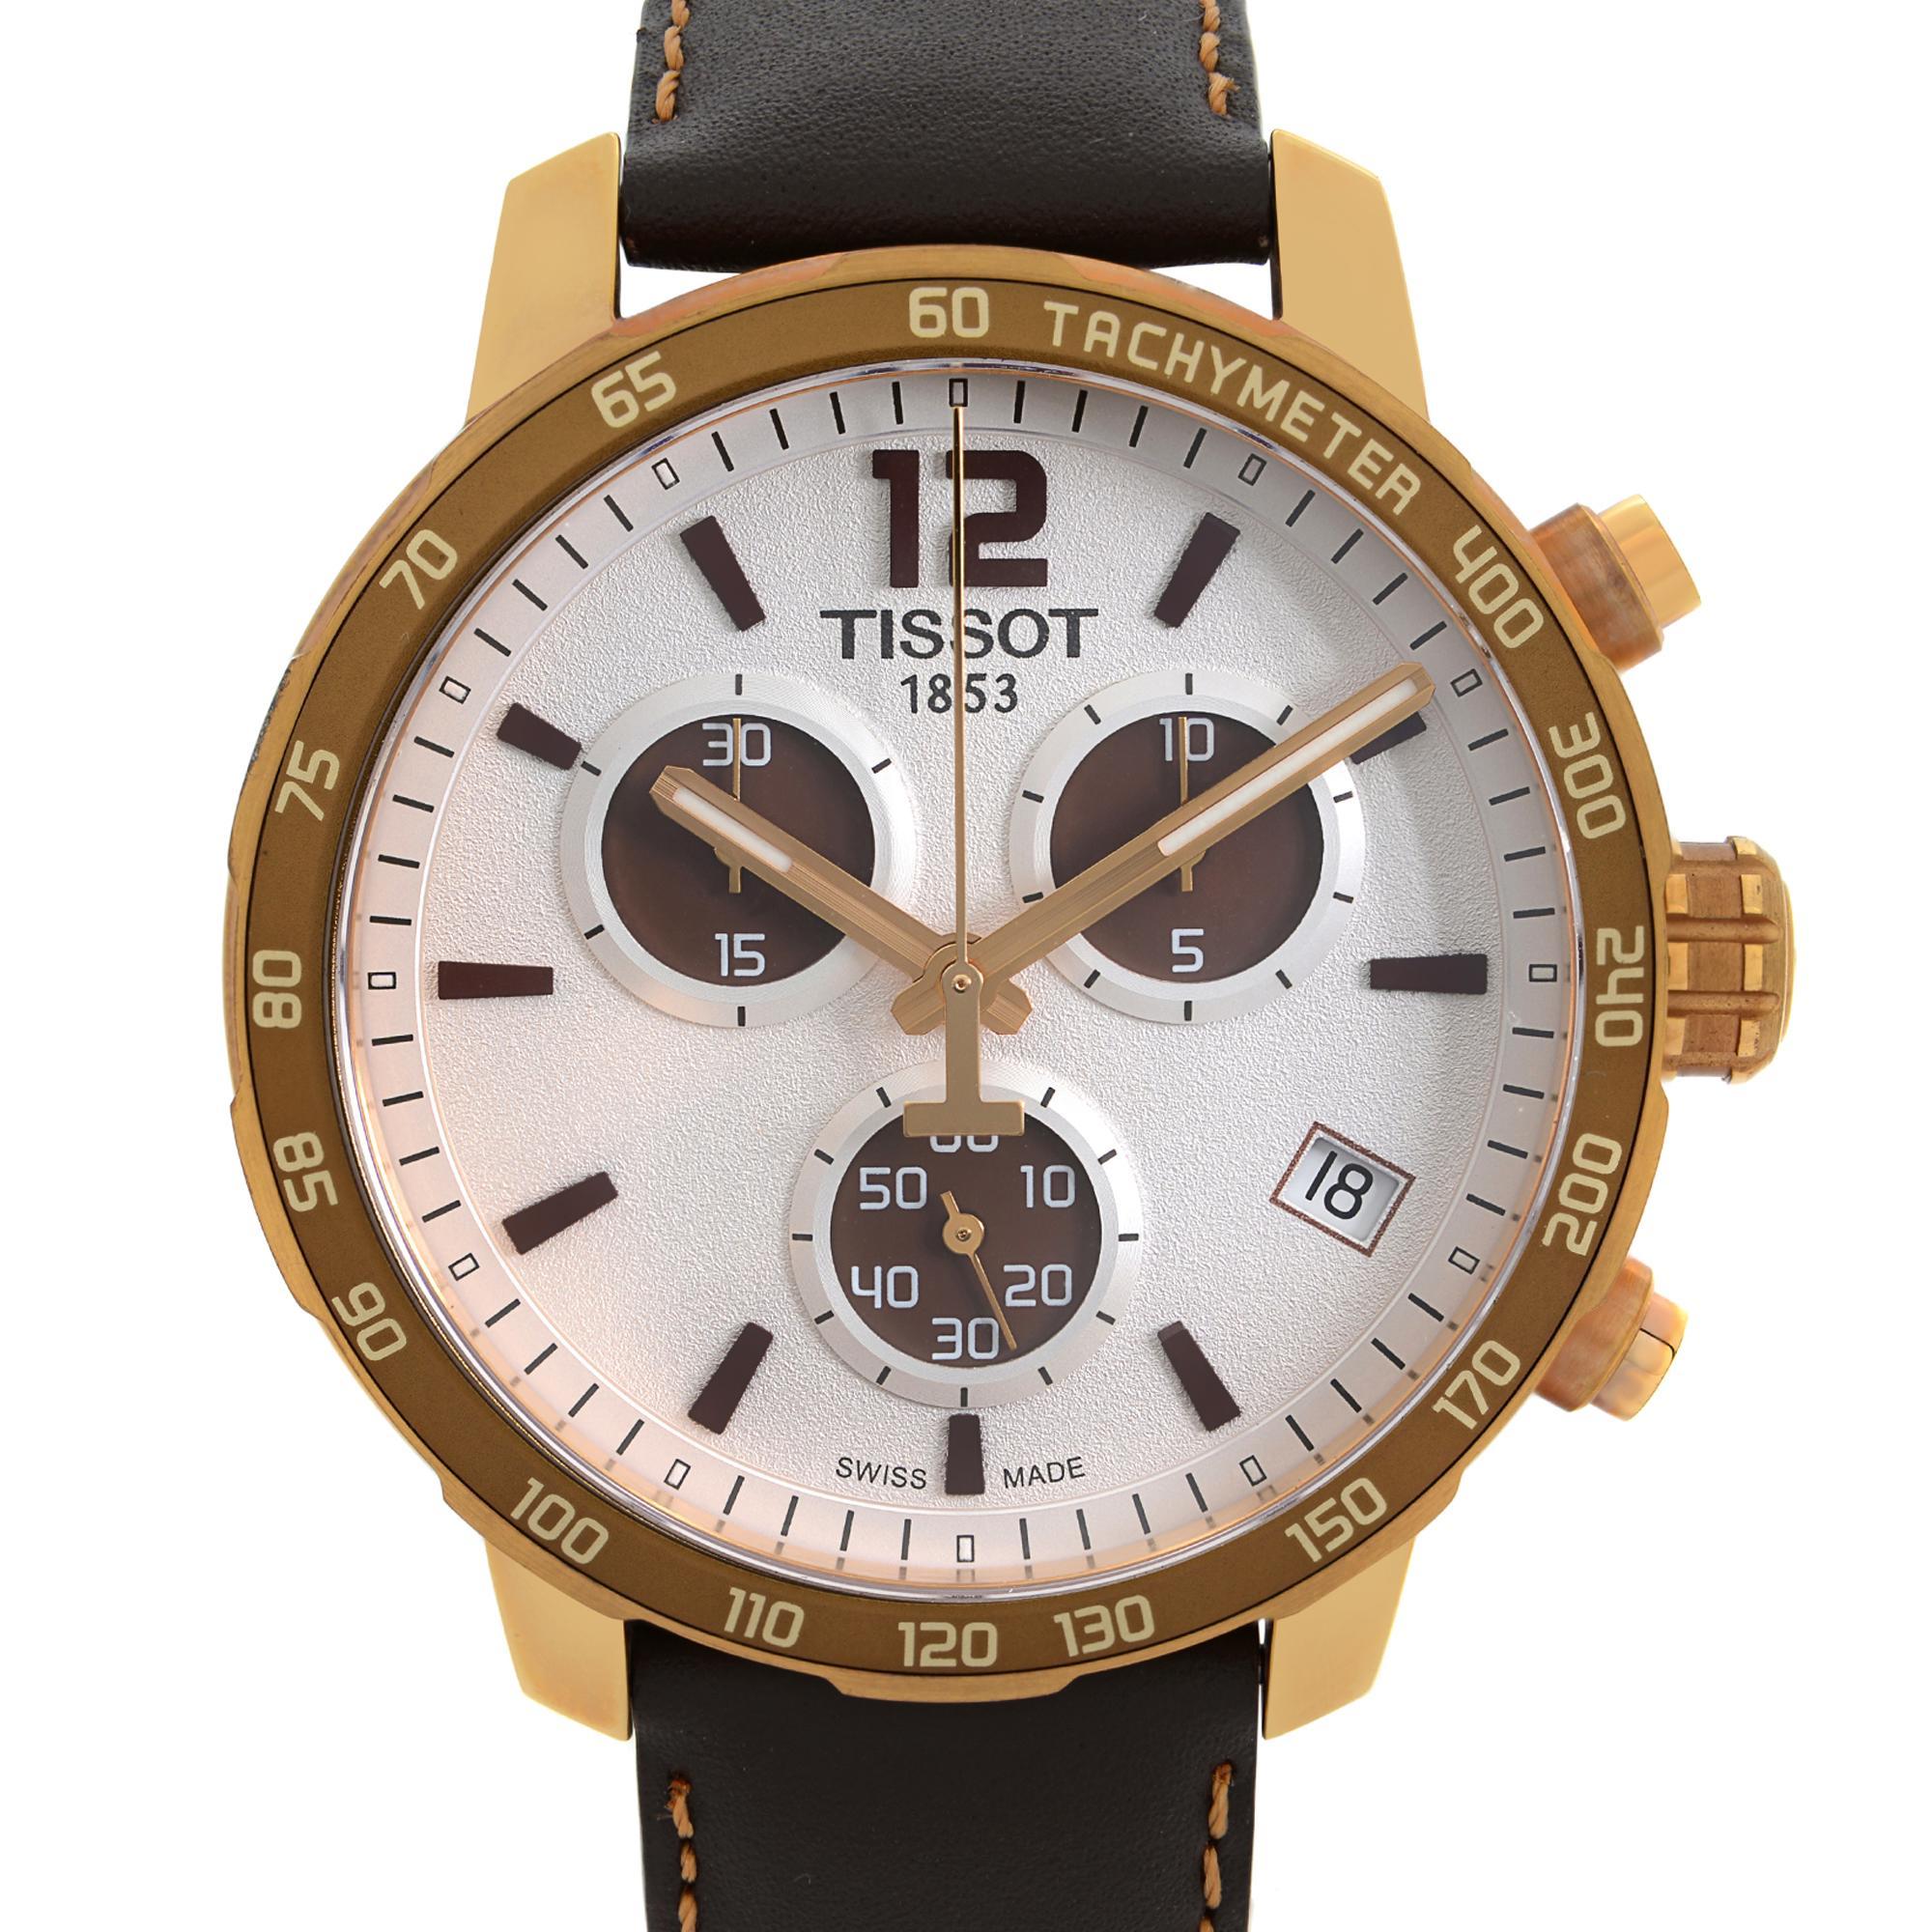 New with Defects Tissot Quickster Quartz Men's Watch T095.417.36.037.01. The Watch has a Tiny Dent on the Inner Side of the Lug. This Timepiece is Powered by a Quartz (Battery) Movement and Features: Rose Gold-Tone Stainless Steel Case with a Brown